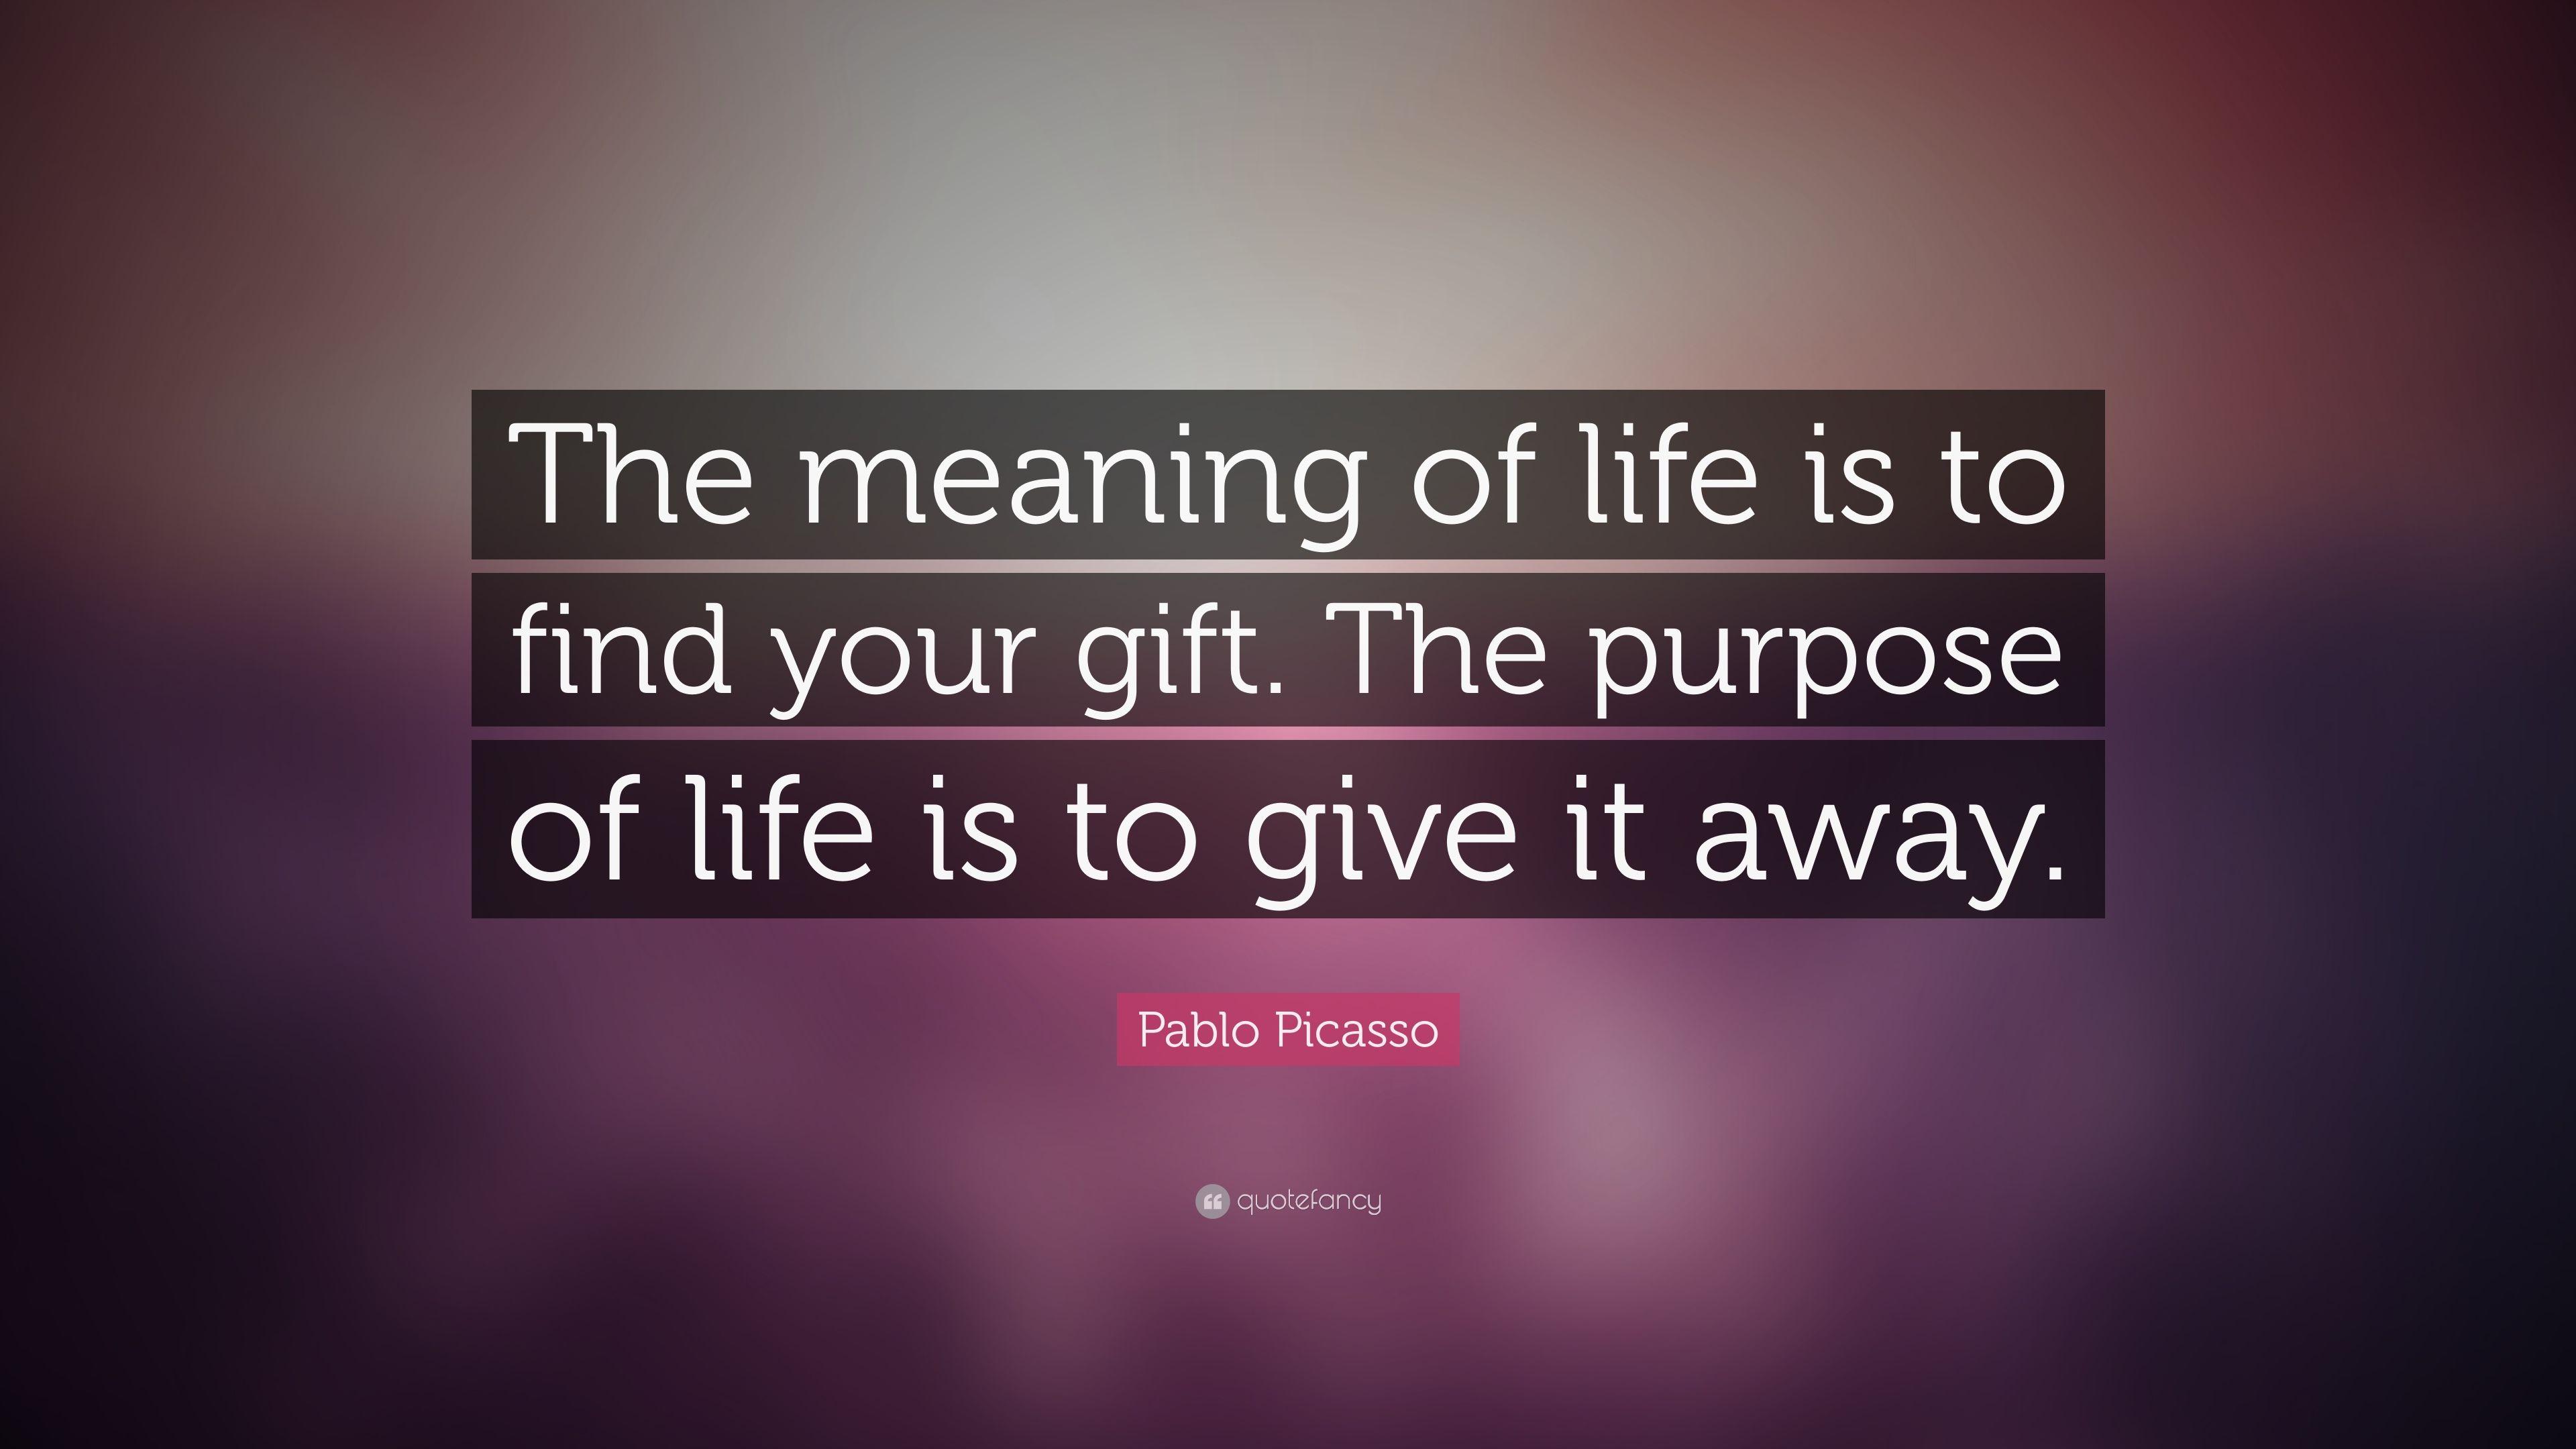 Pablo Picasso Quote: “The meaning of life is to find your gift